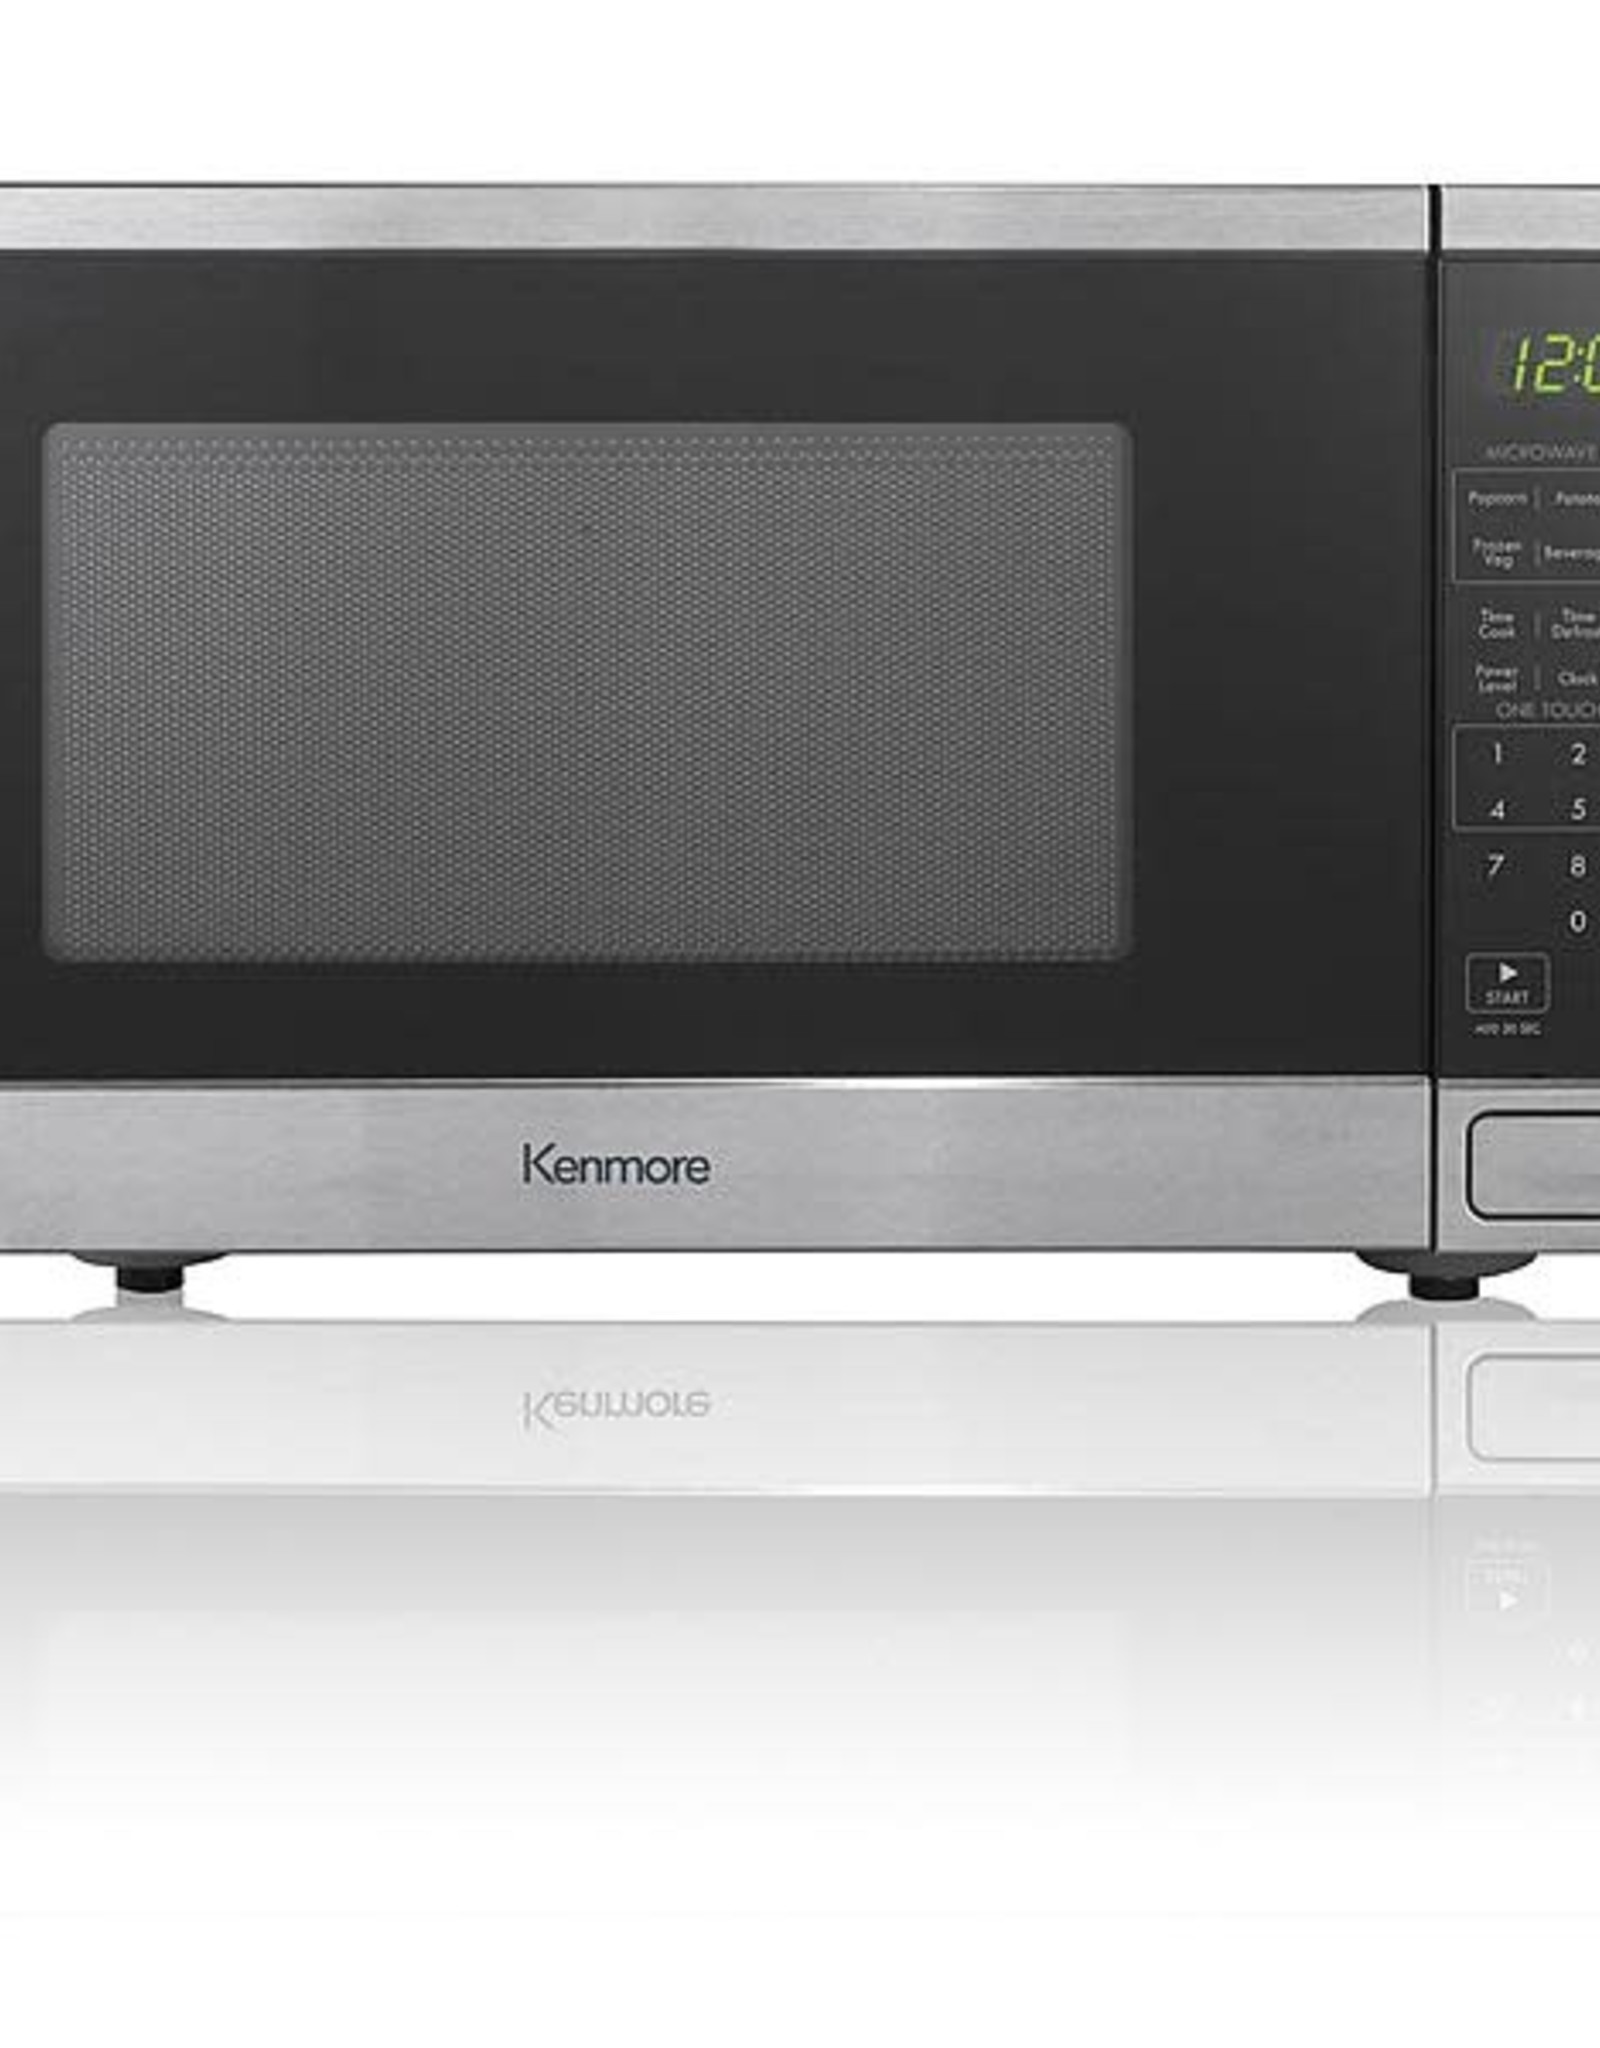 Kenmore osterMicrowave